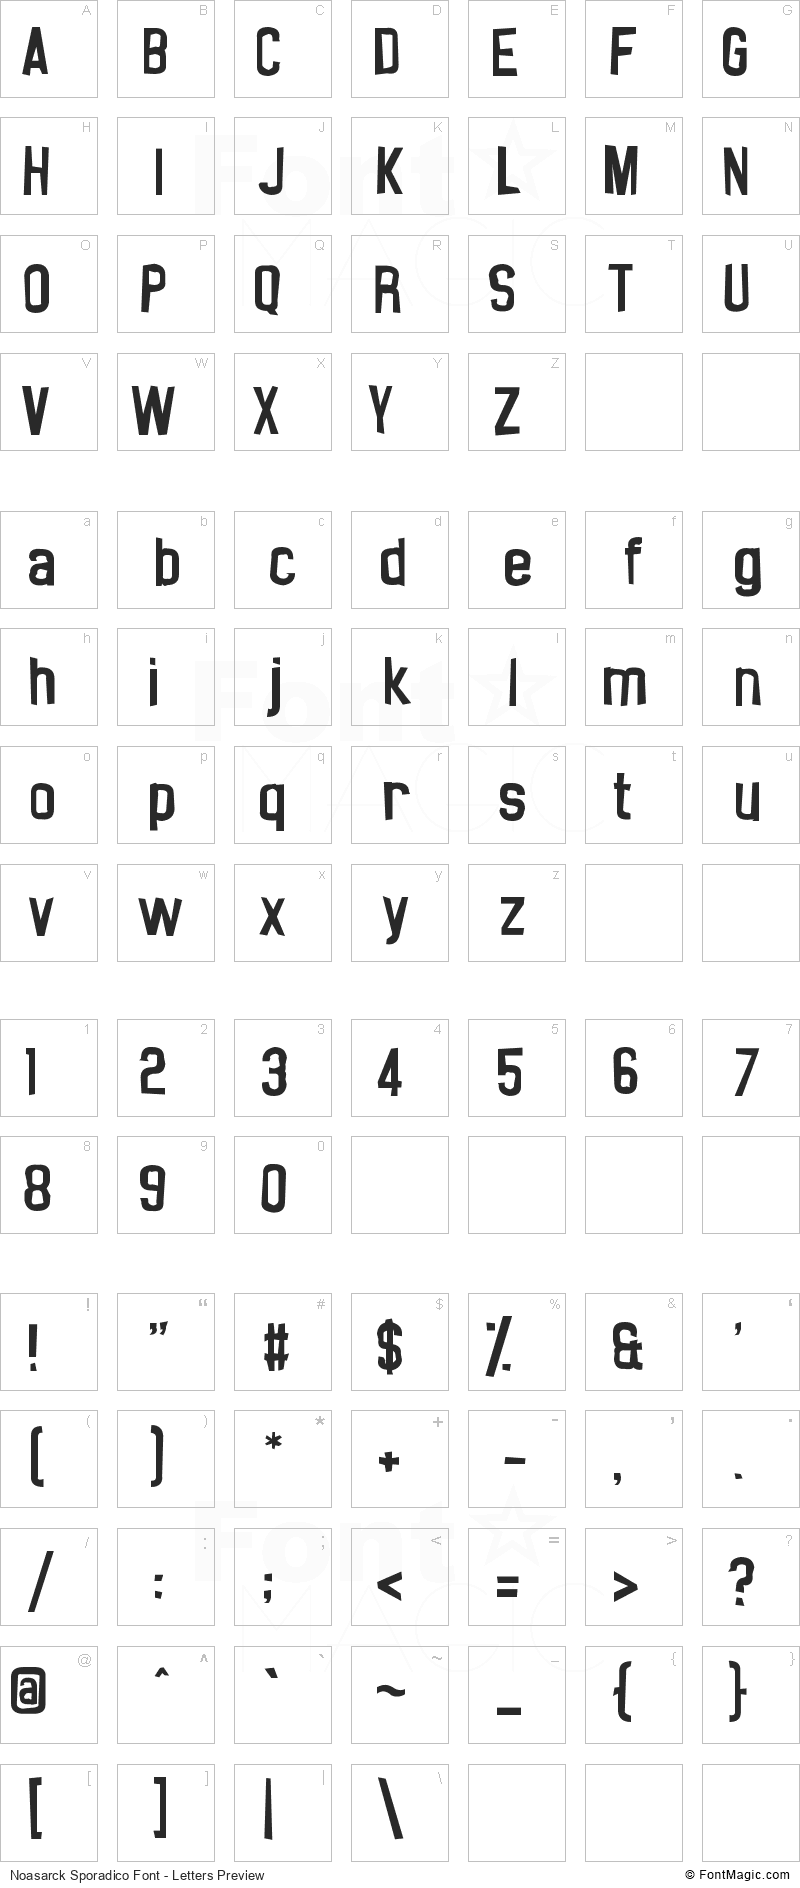 Noasarck Sporadico Font - All Latters Preview Chart